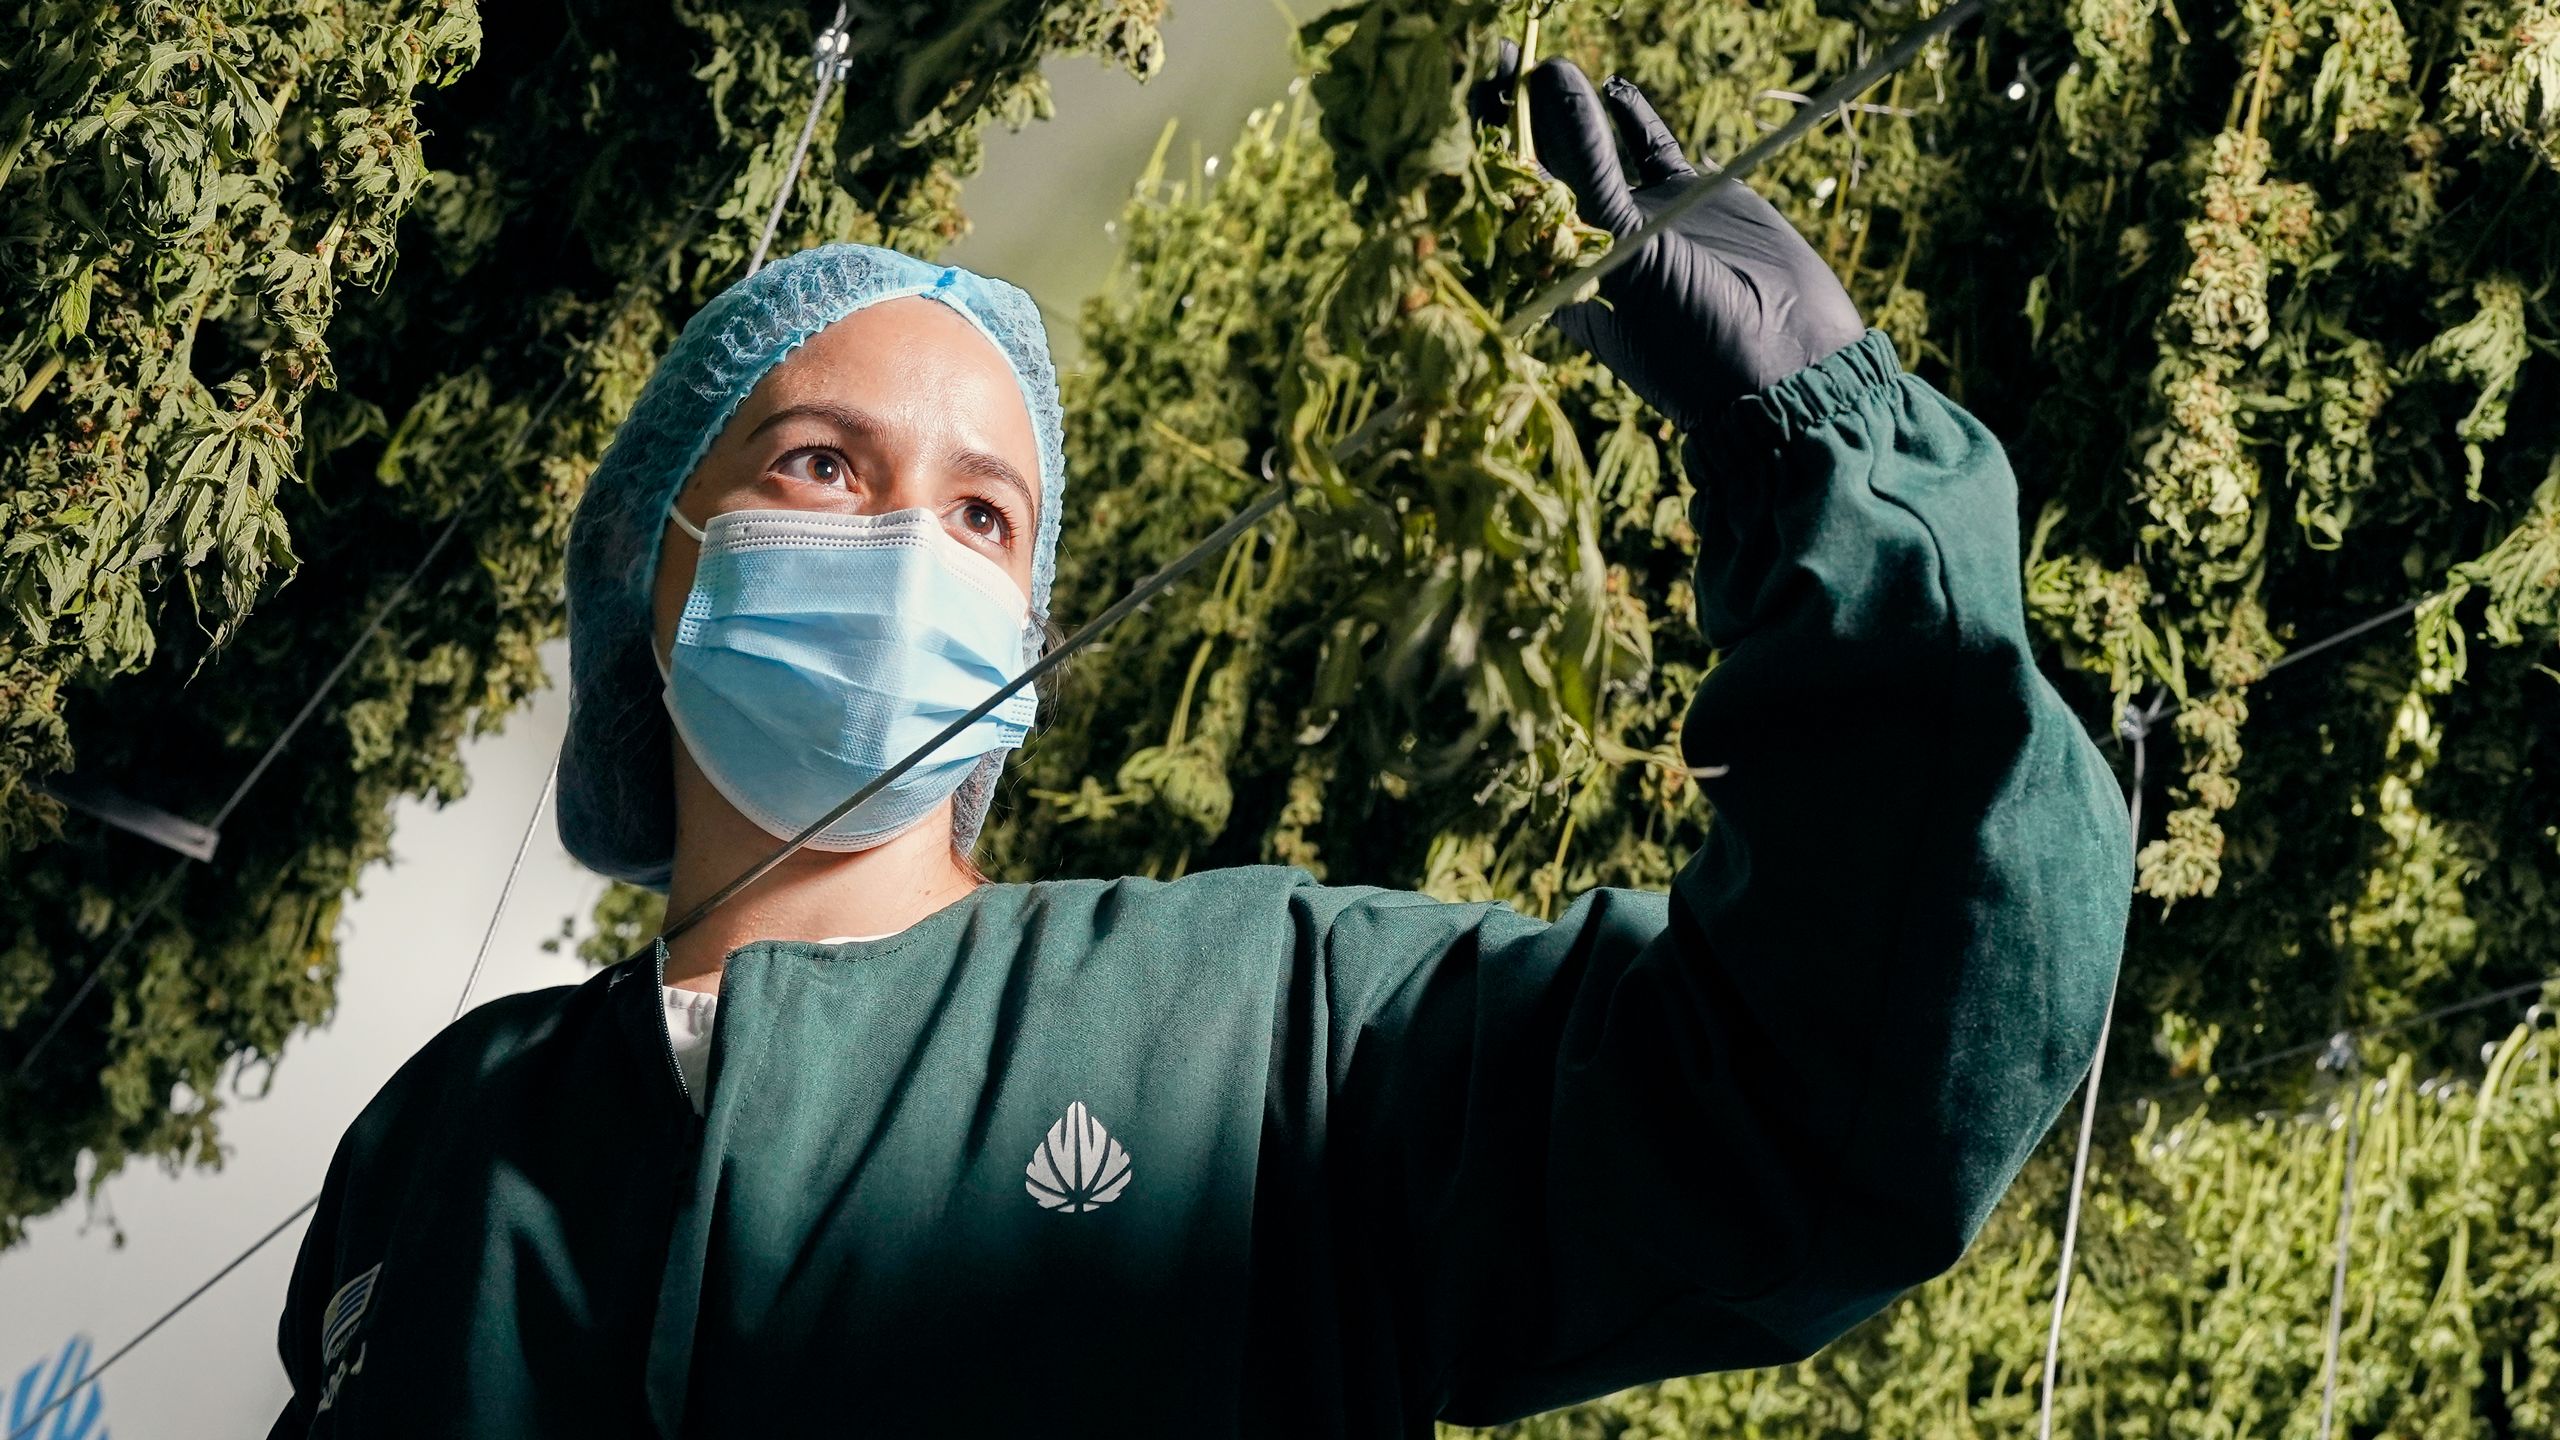 Helena González wearing a hair net and face covering a inspecting hanging drying cannabis plants